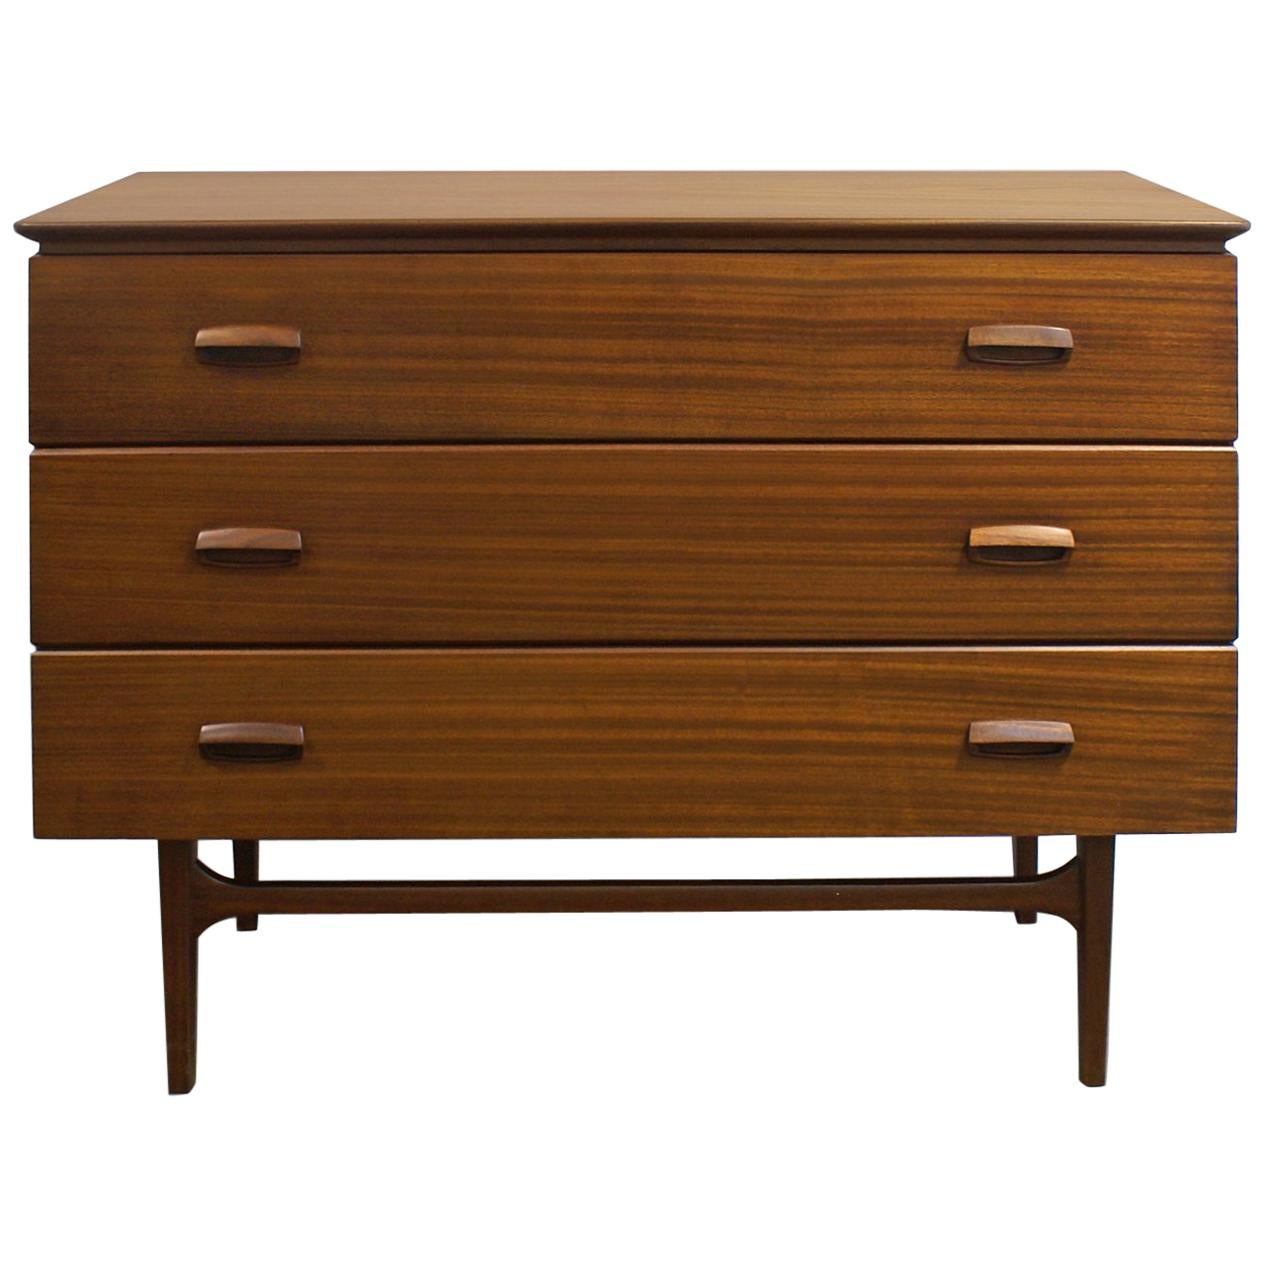 1960s Modern Portuguese Chest of Drawers, Olaio